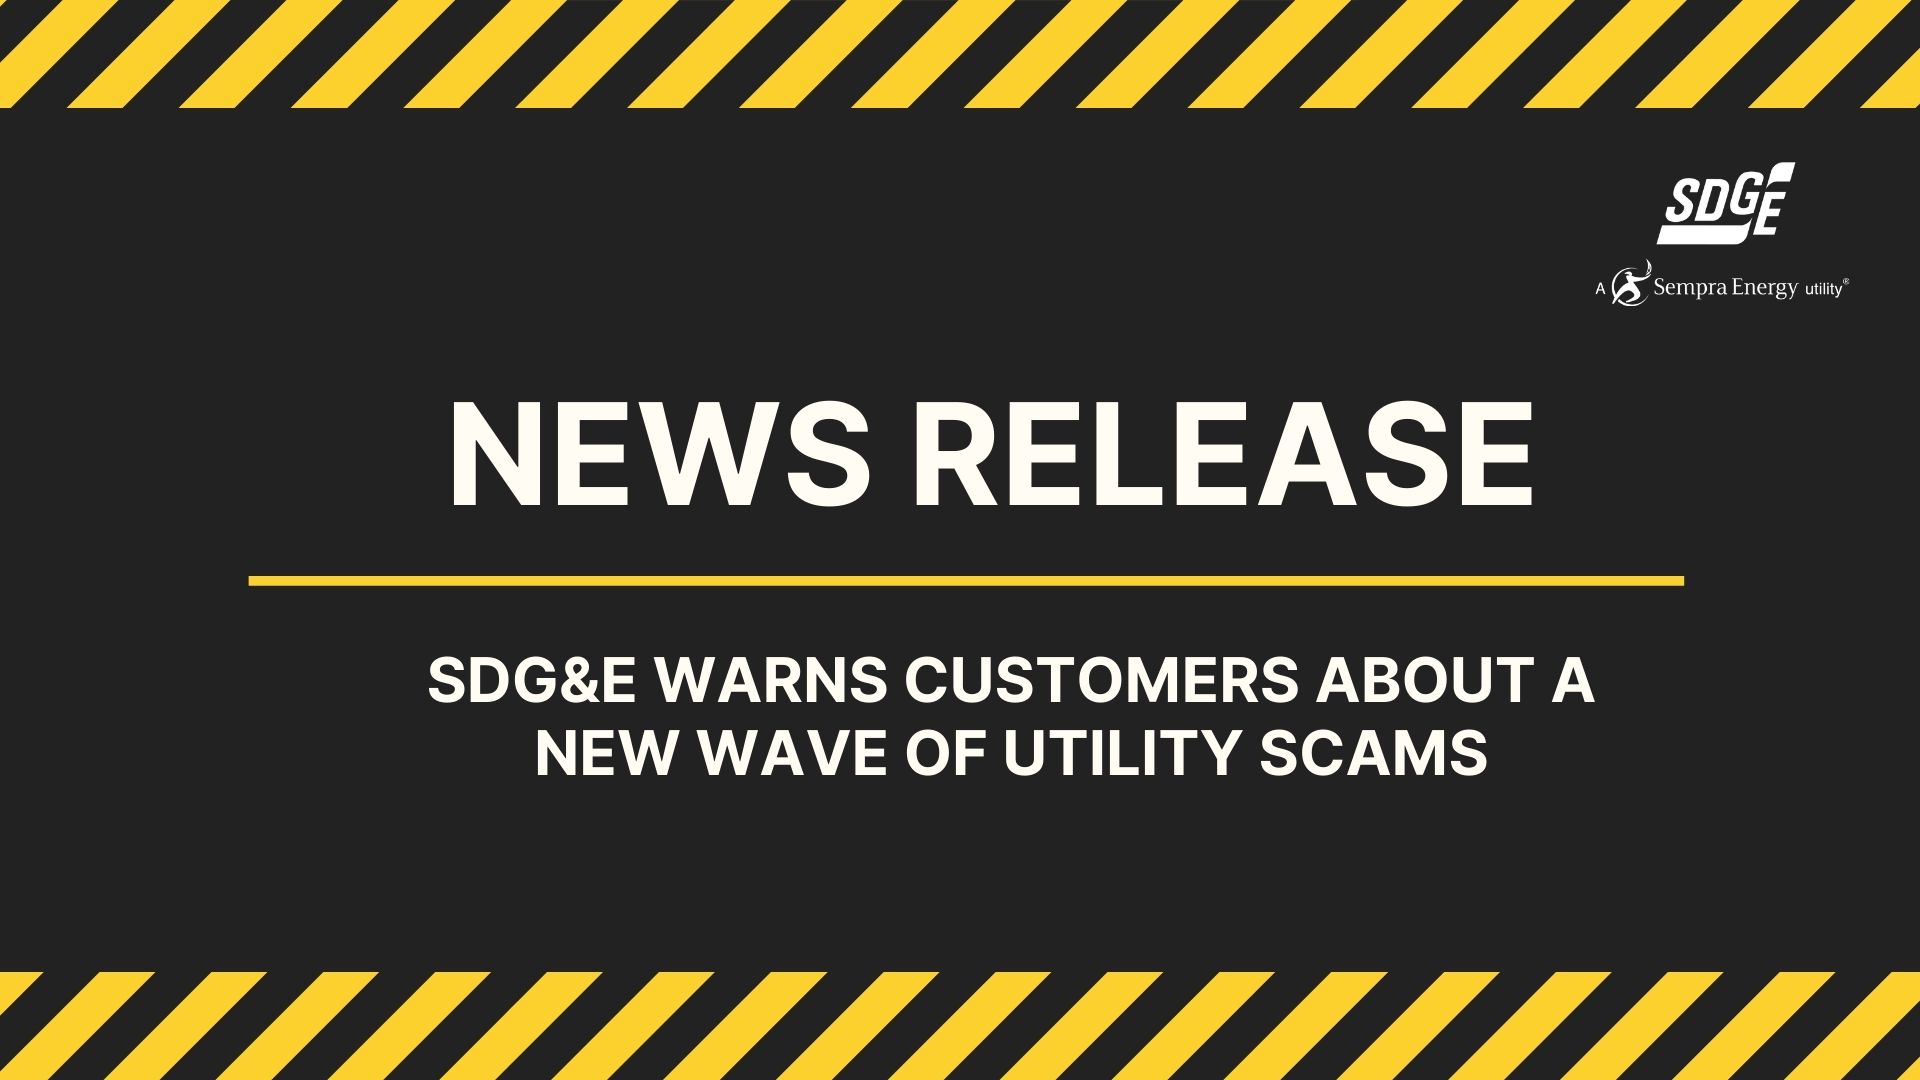 SDG&E Warns Customers About A New Wave Of Utility Scams | SDGE | San Diego Gas & Electric - News ...